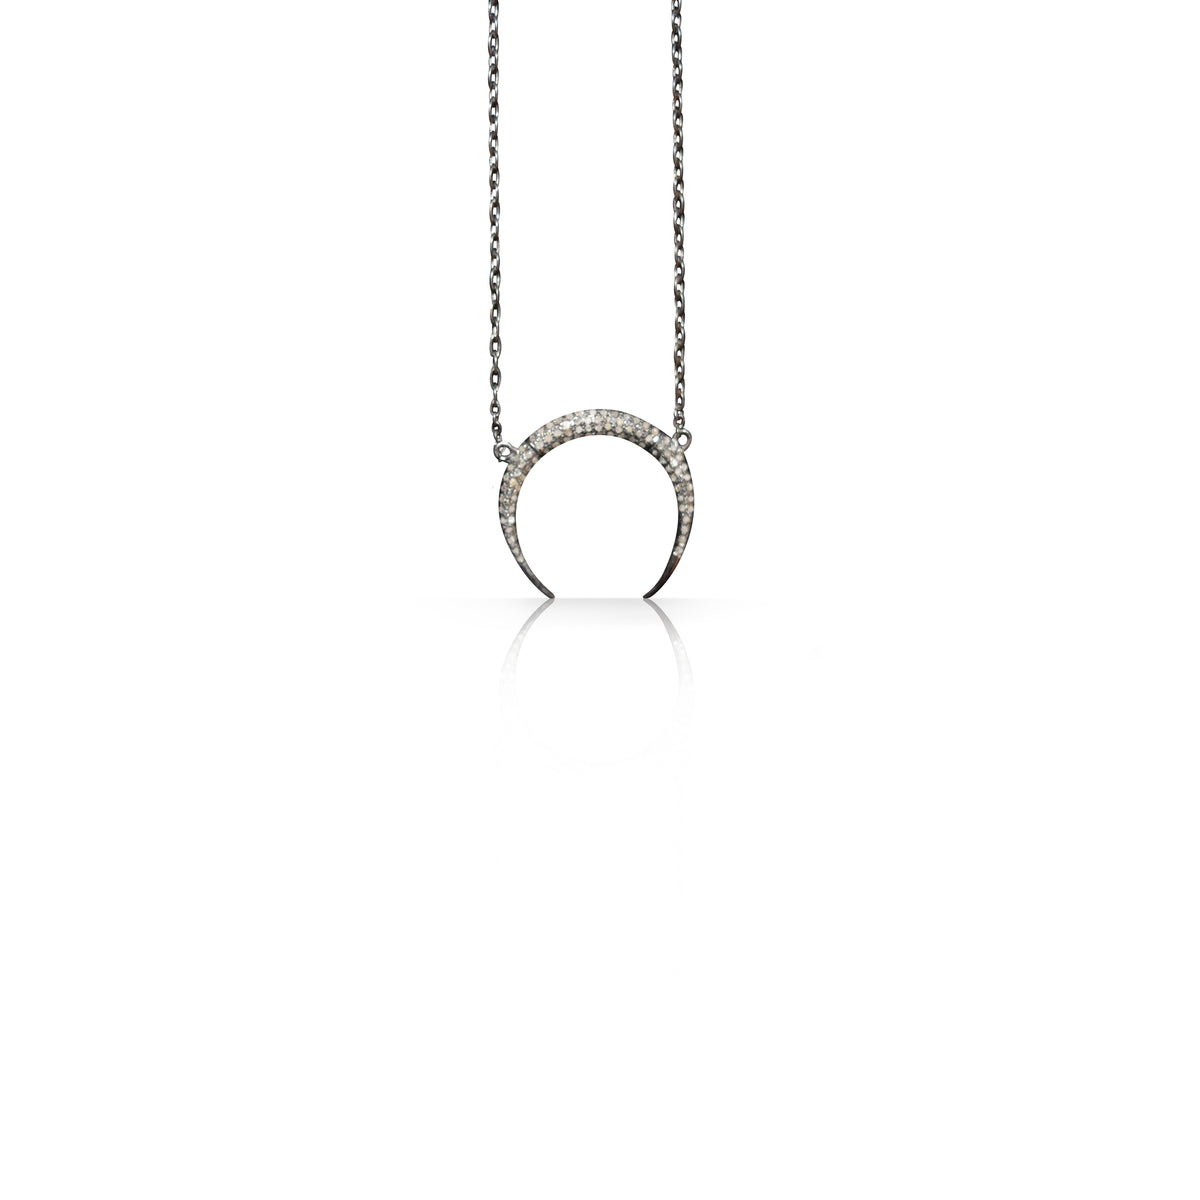 Double Tusk Charm Necklace